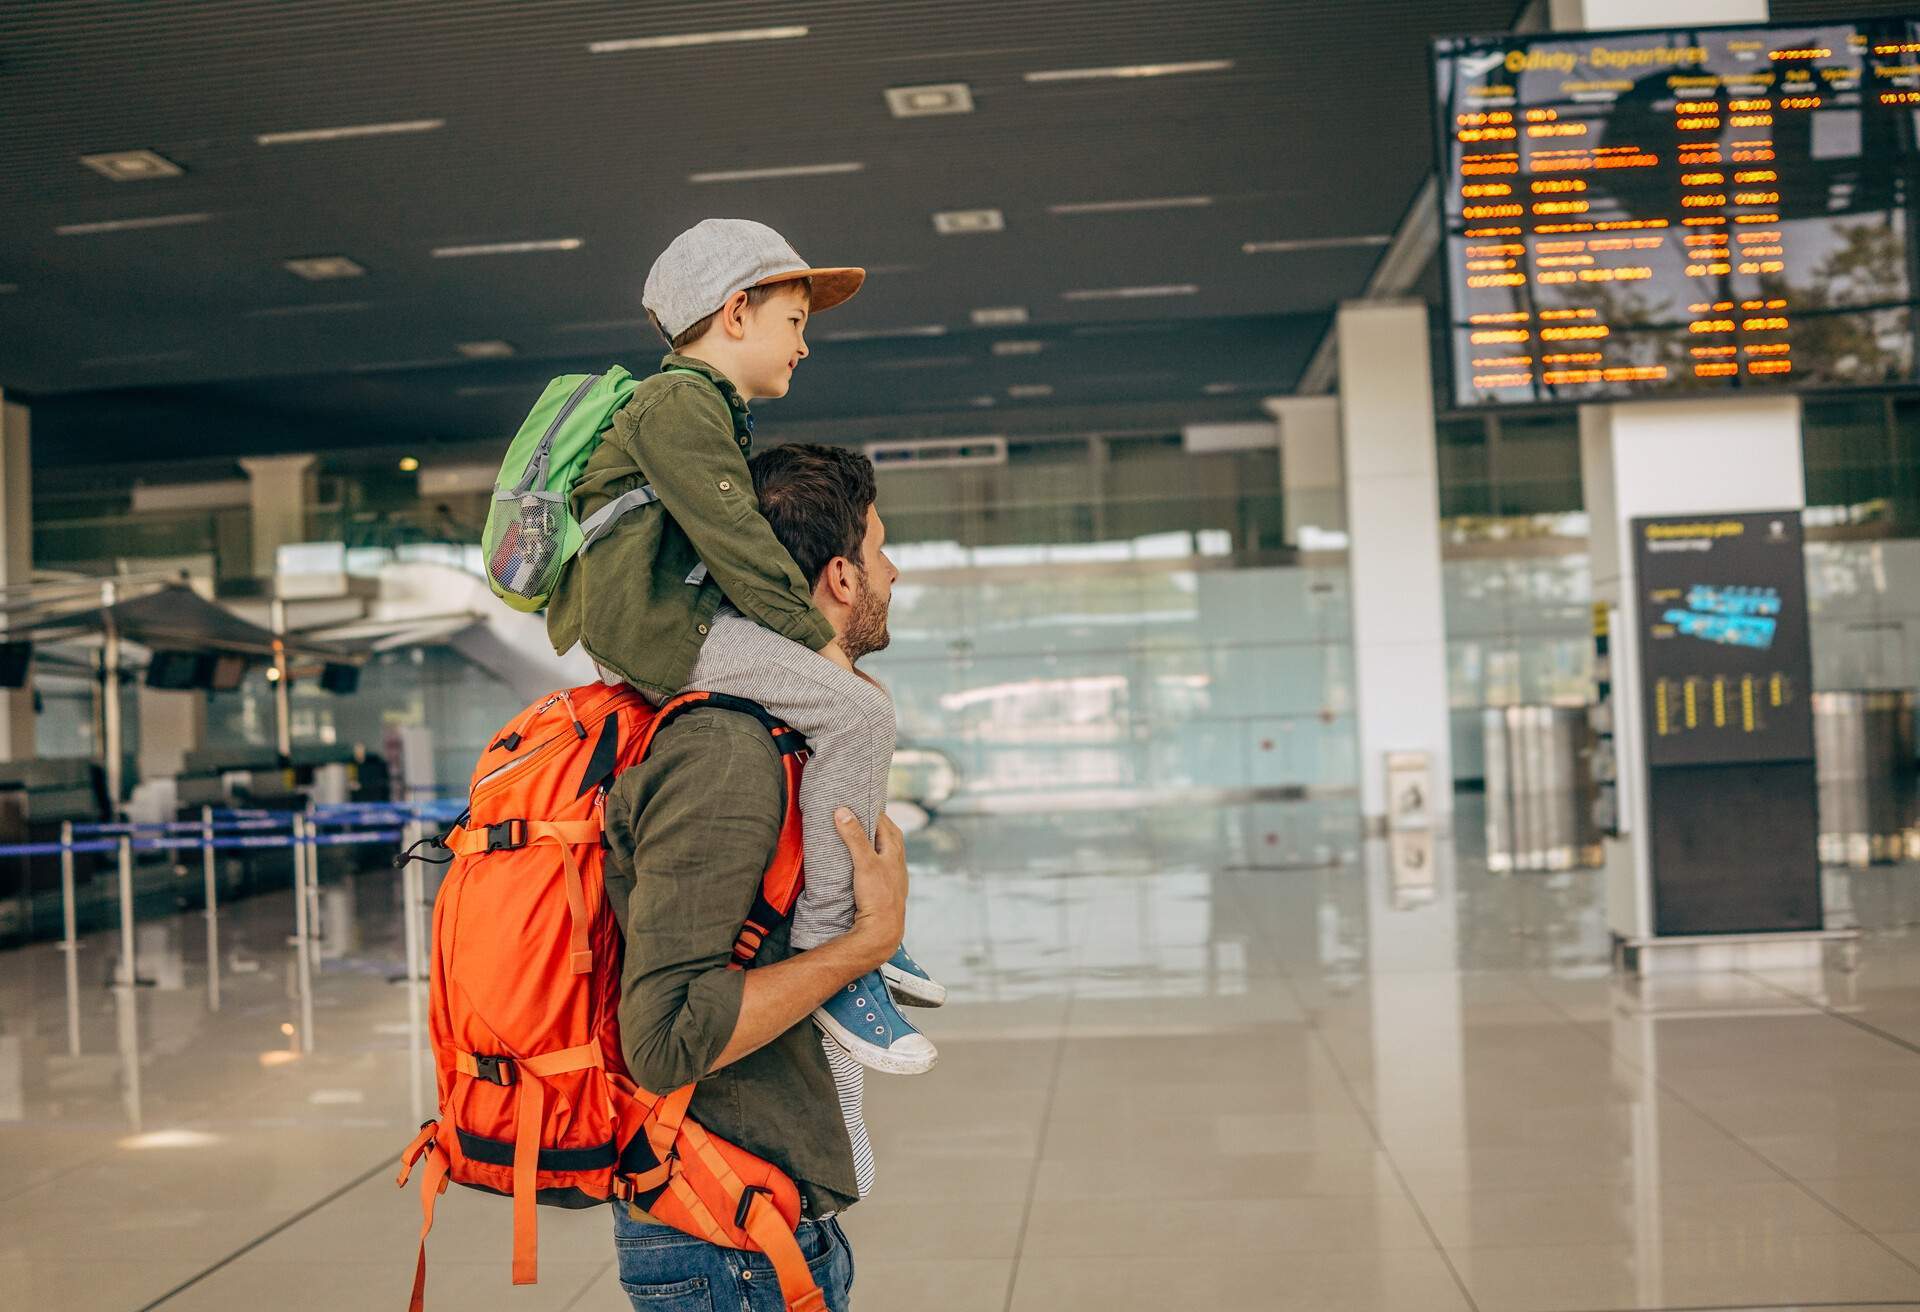 A man with an orange bag carries a kid on his shoulders while standing on an airport.